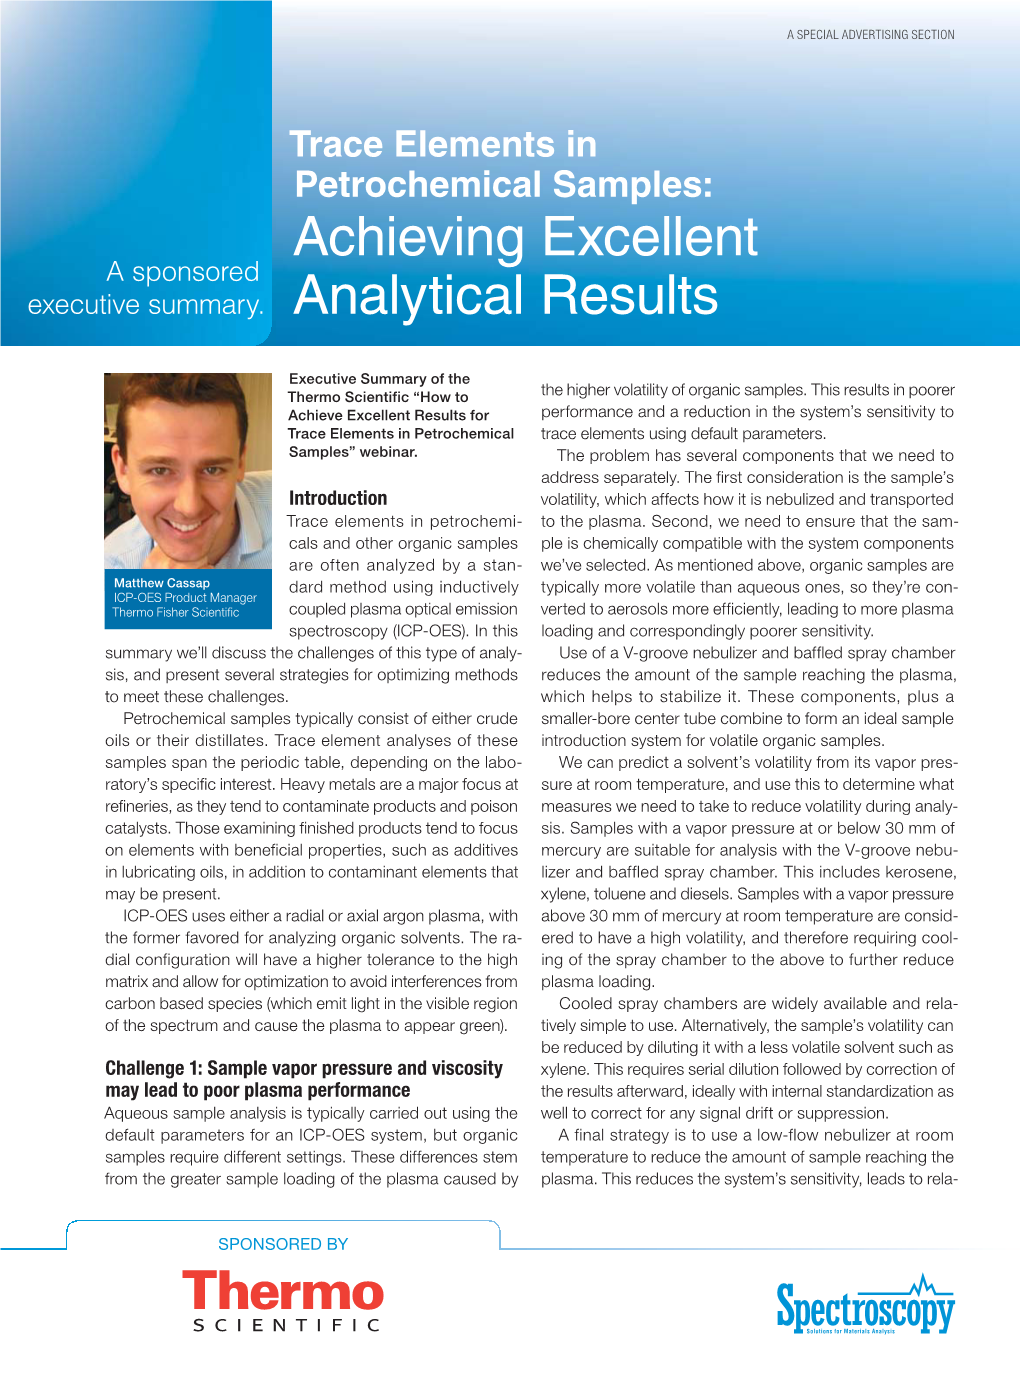 Trace Elements in Petrochemical Samples: Achieving Excellent a Sponsored Executive Summary